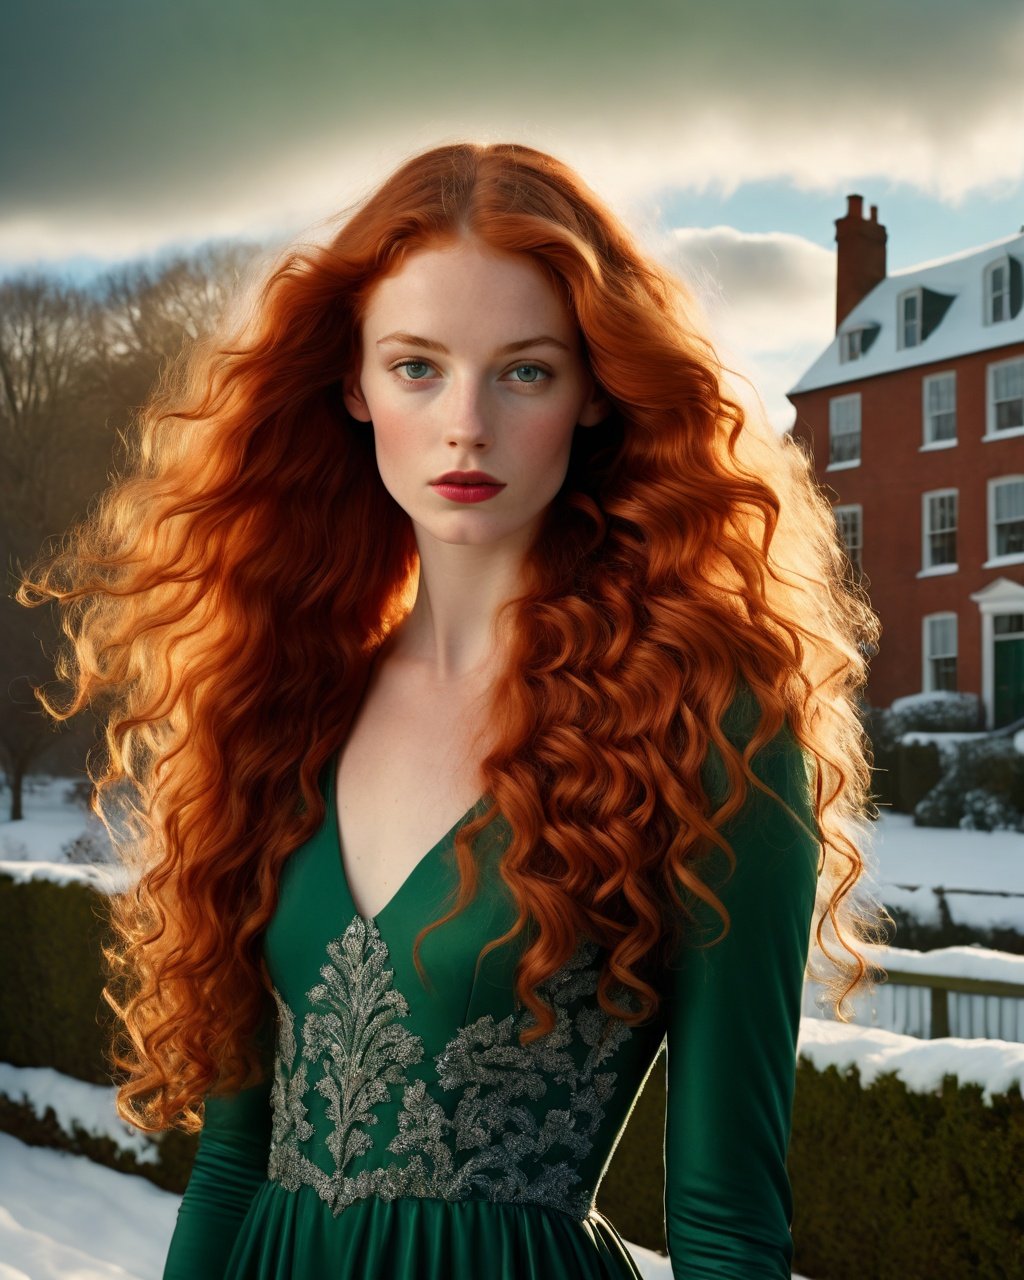 beautiful 23-year-old woman with very long red wavy hair, elegant dress, photo by David LaChapelle, amber and green, volumetric lighting, outdoors, half body photography, cloudy winter, realistic, photorealistic, afternoon, highly detailed, 4k resolution, high definition, by Saul Leiter,